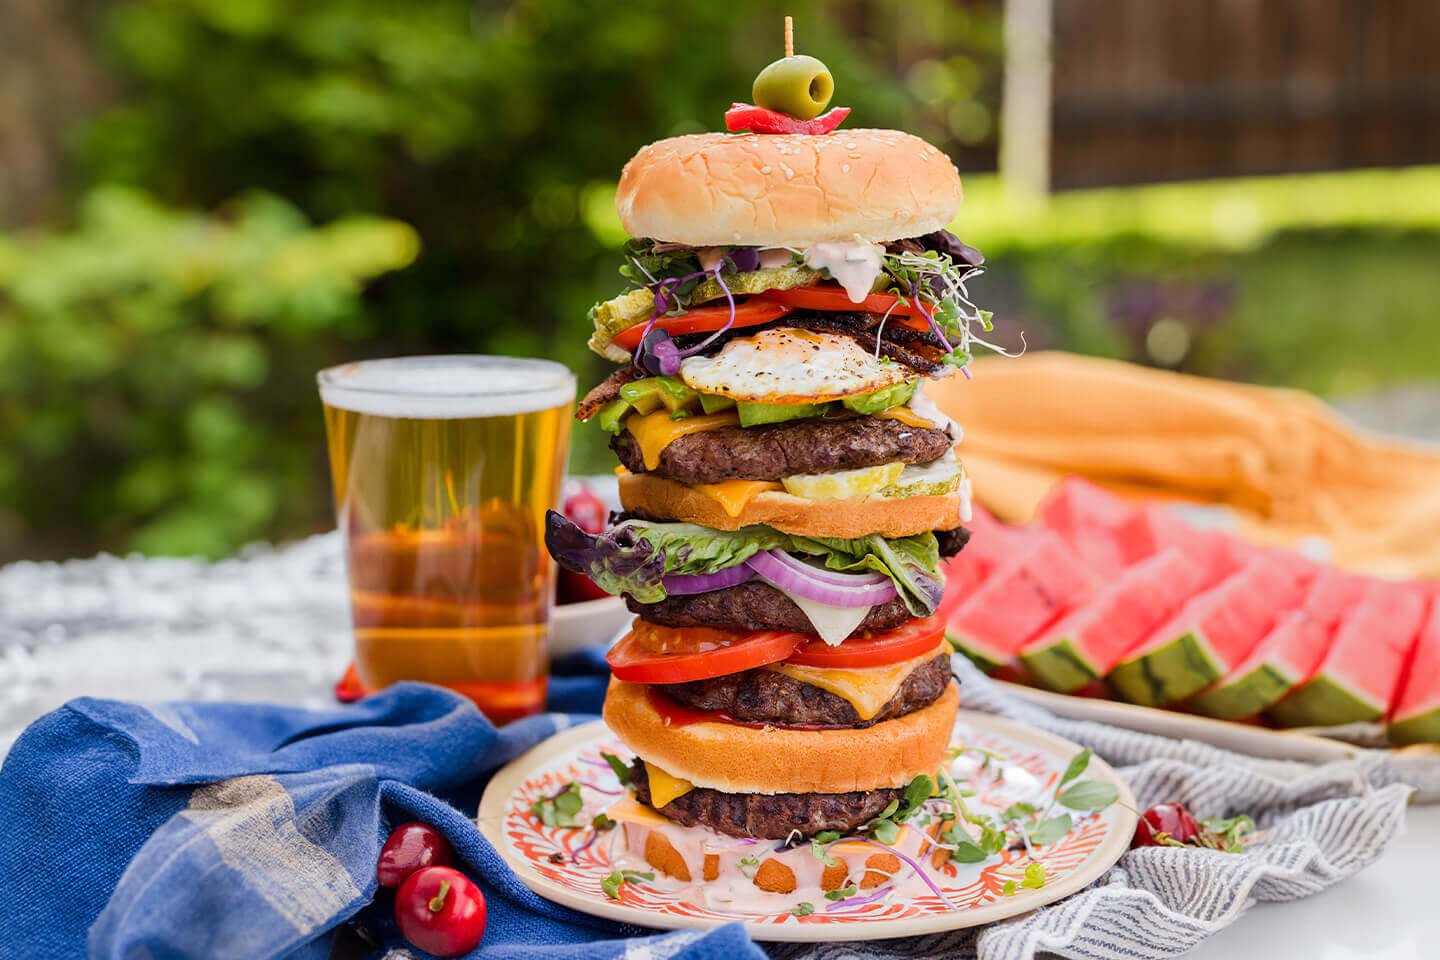 a gigantic burger stacked high with multiple beef patties and layers of cheese, egg, tomato and more!